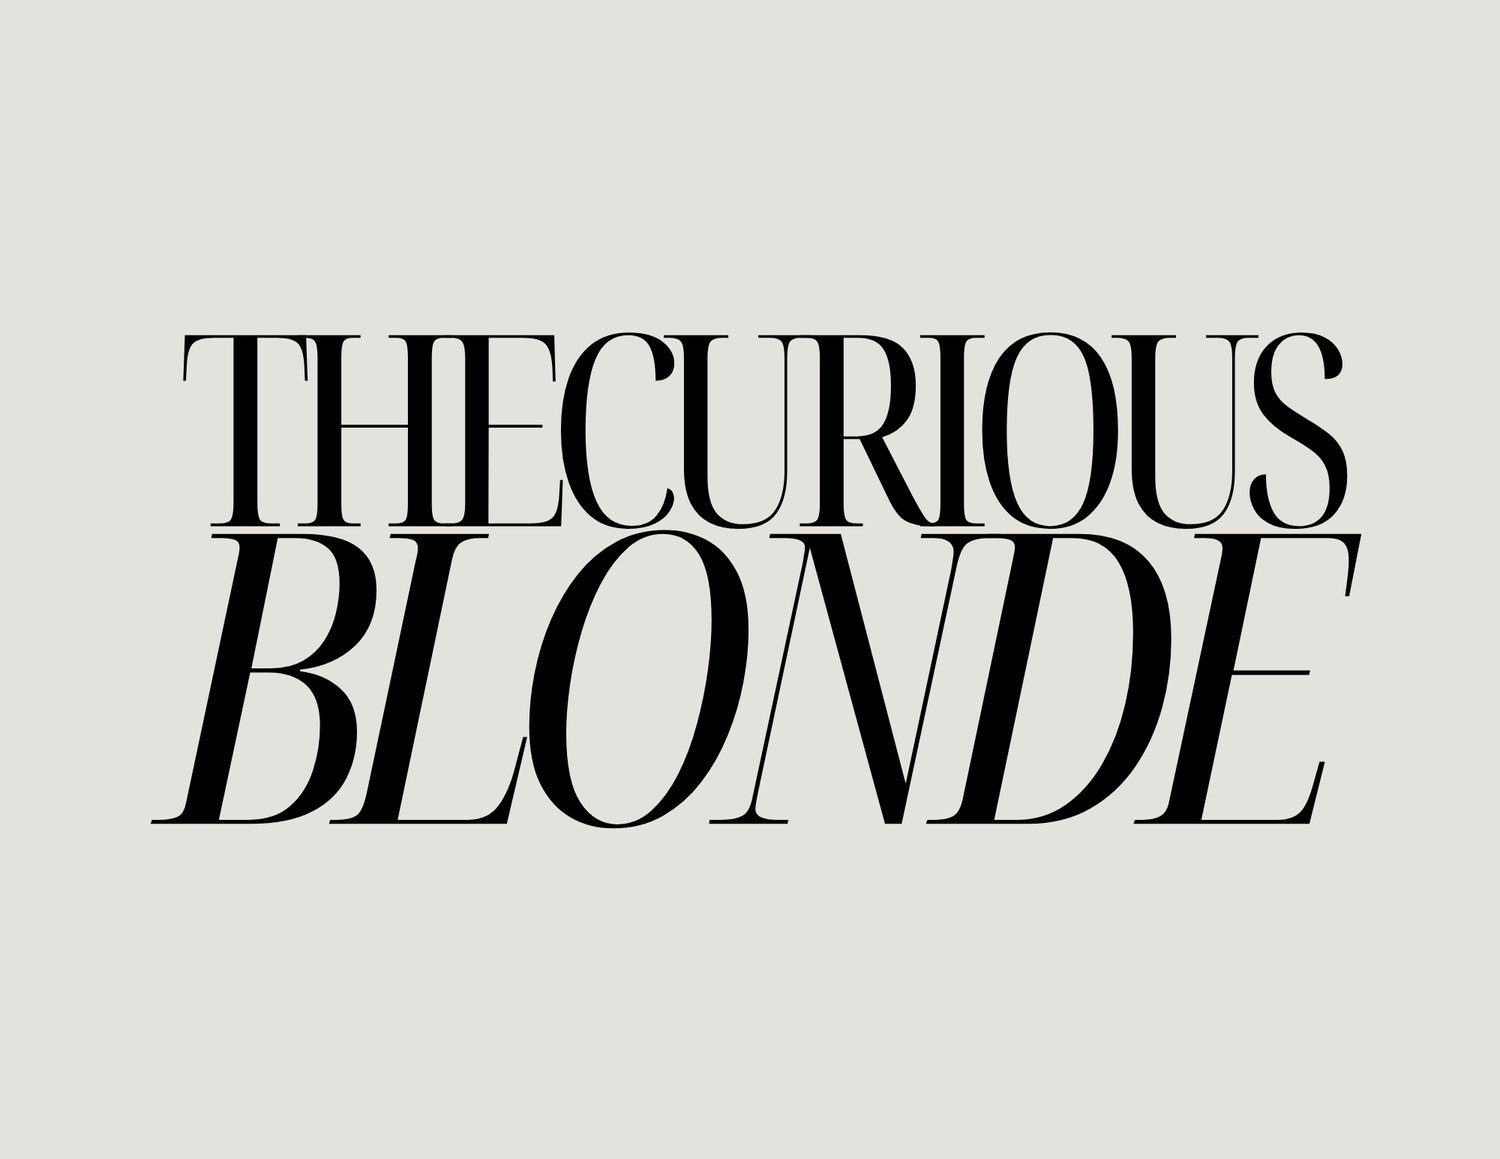 THE CURIOUS BLONDE